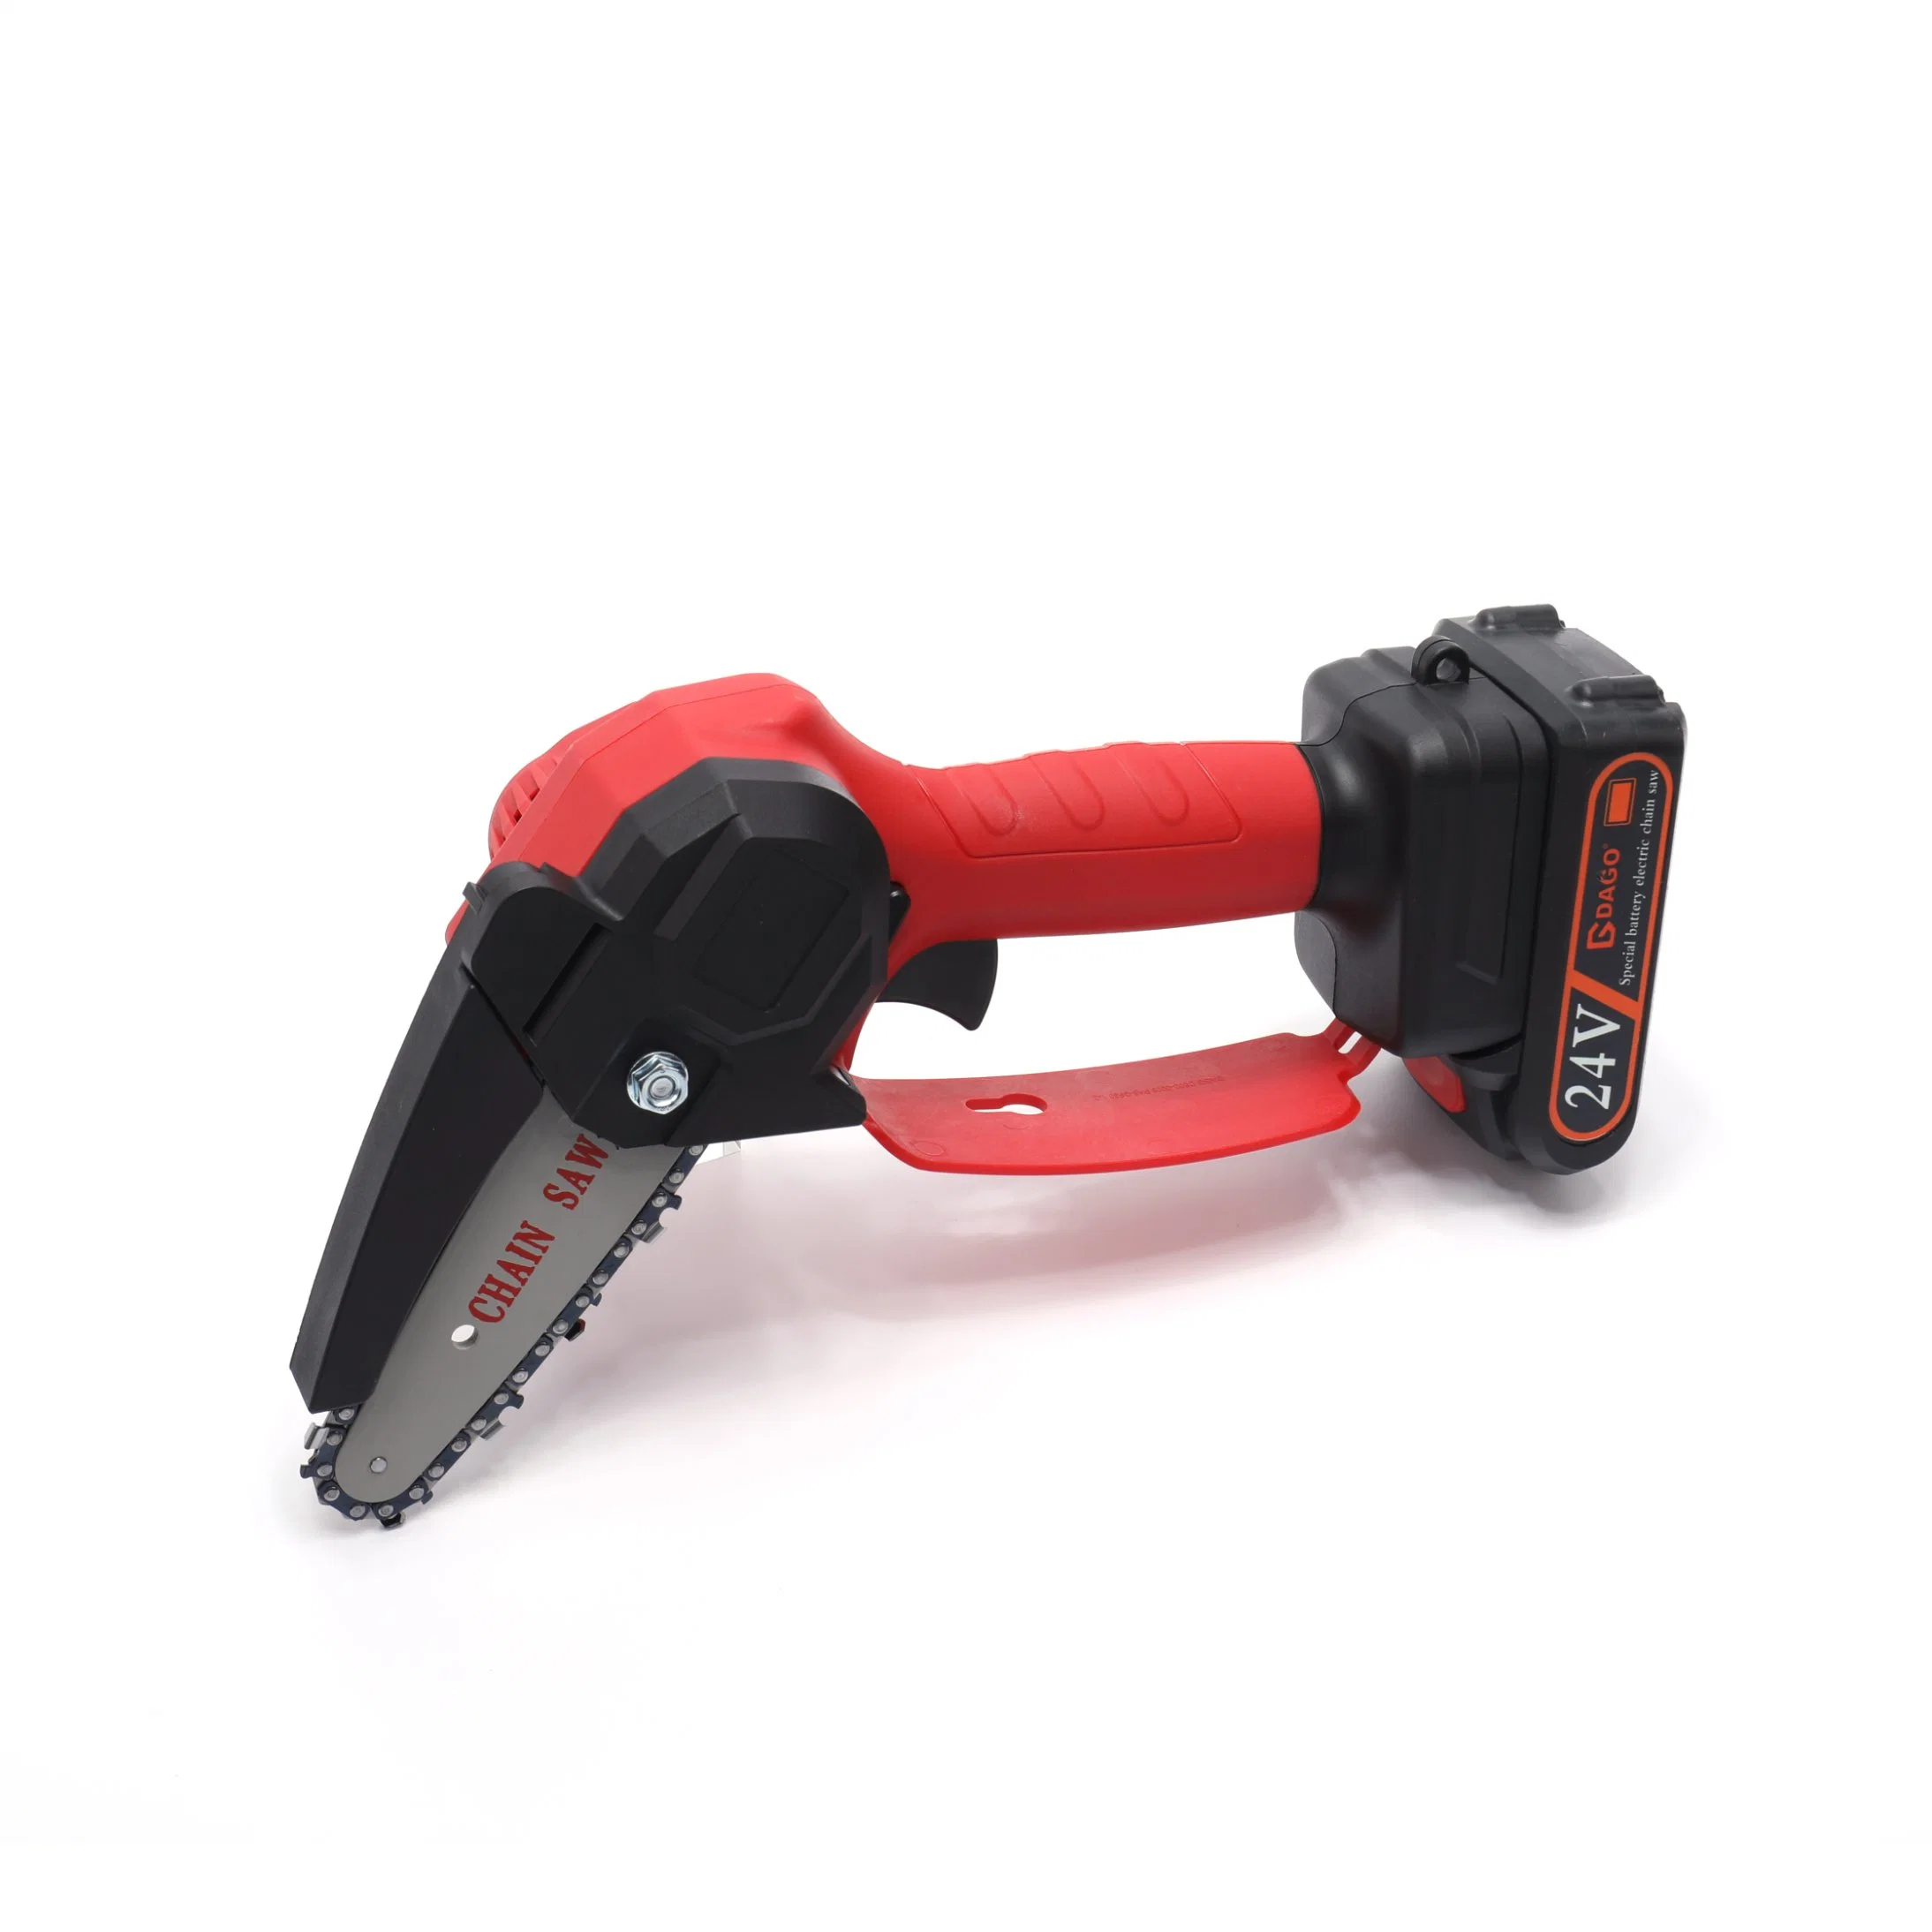 Wholesale/Supplier New Style Garden Tools Outdoor, Red Strong Power Tools Used for Garden Decoration and Trimming